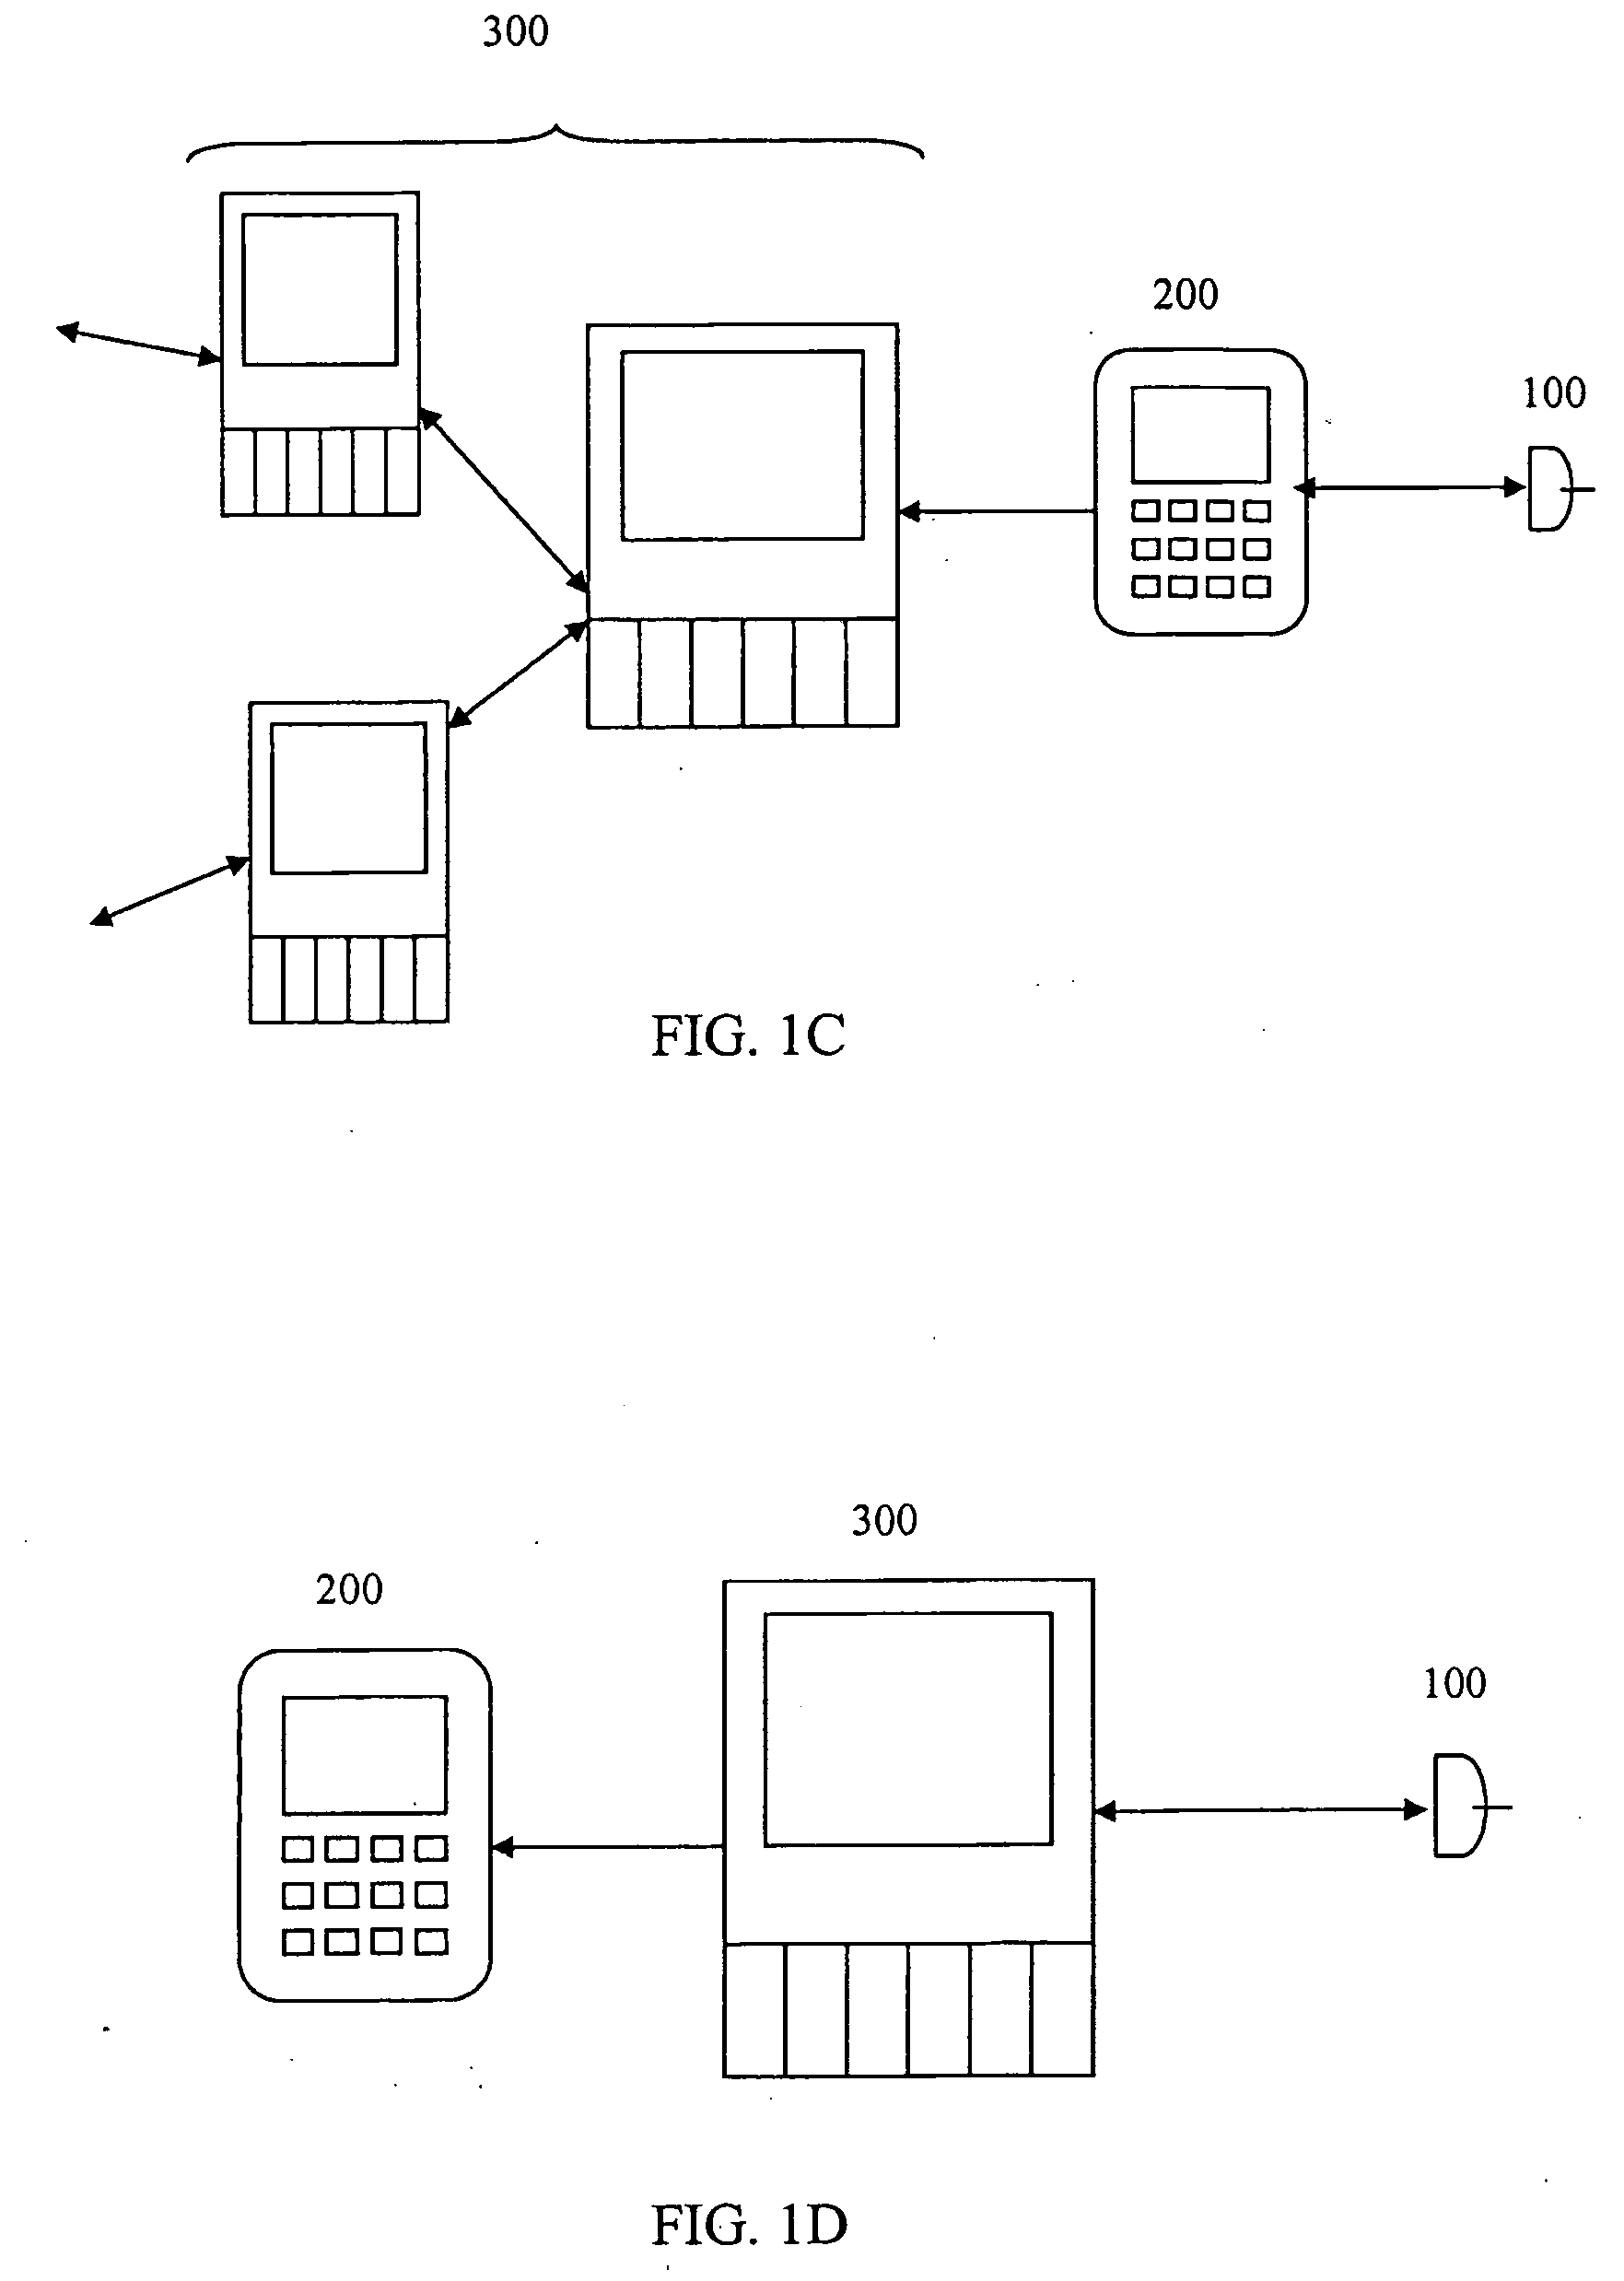 Analyte sensing apparatus for hospital use